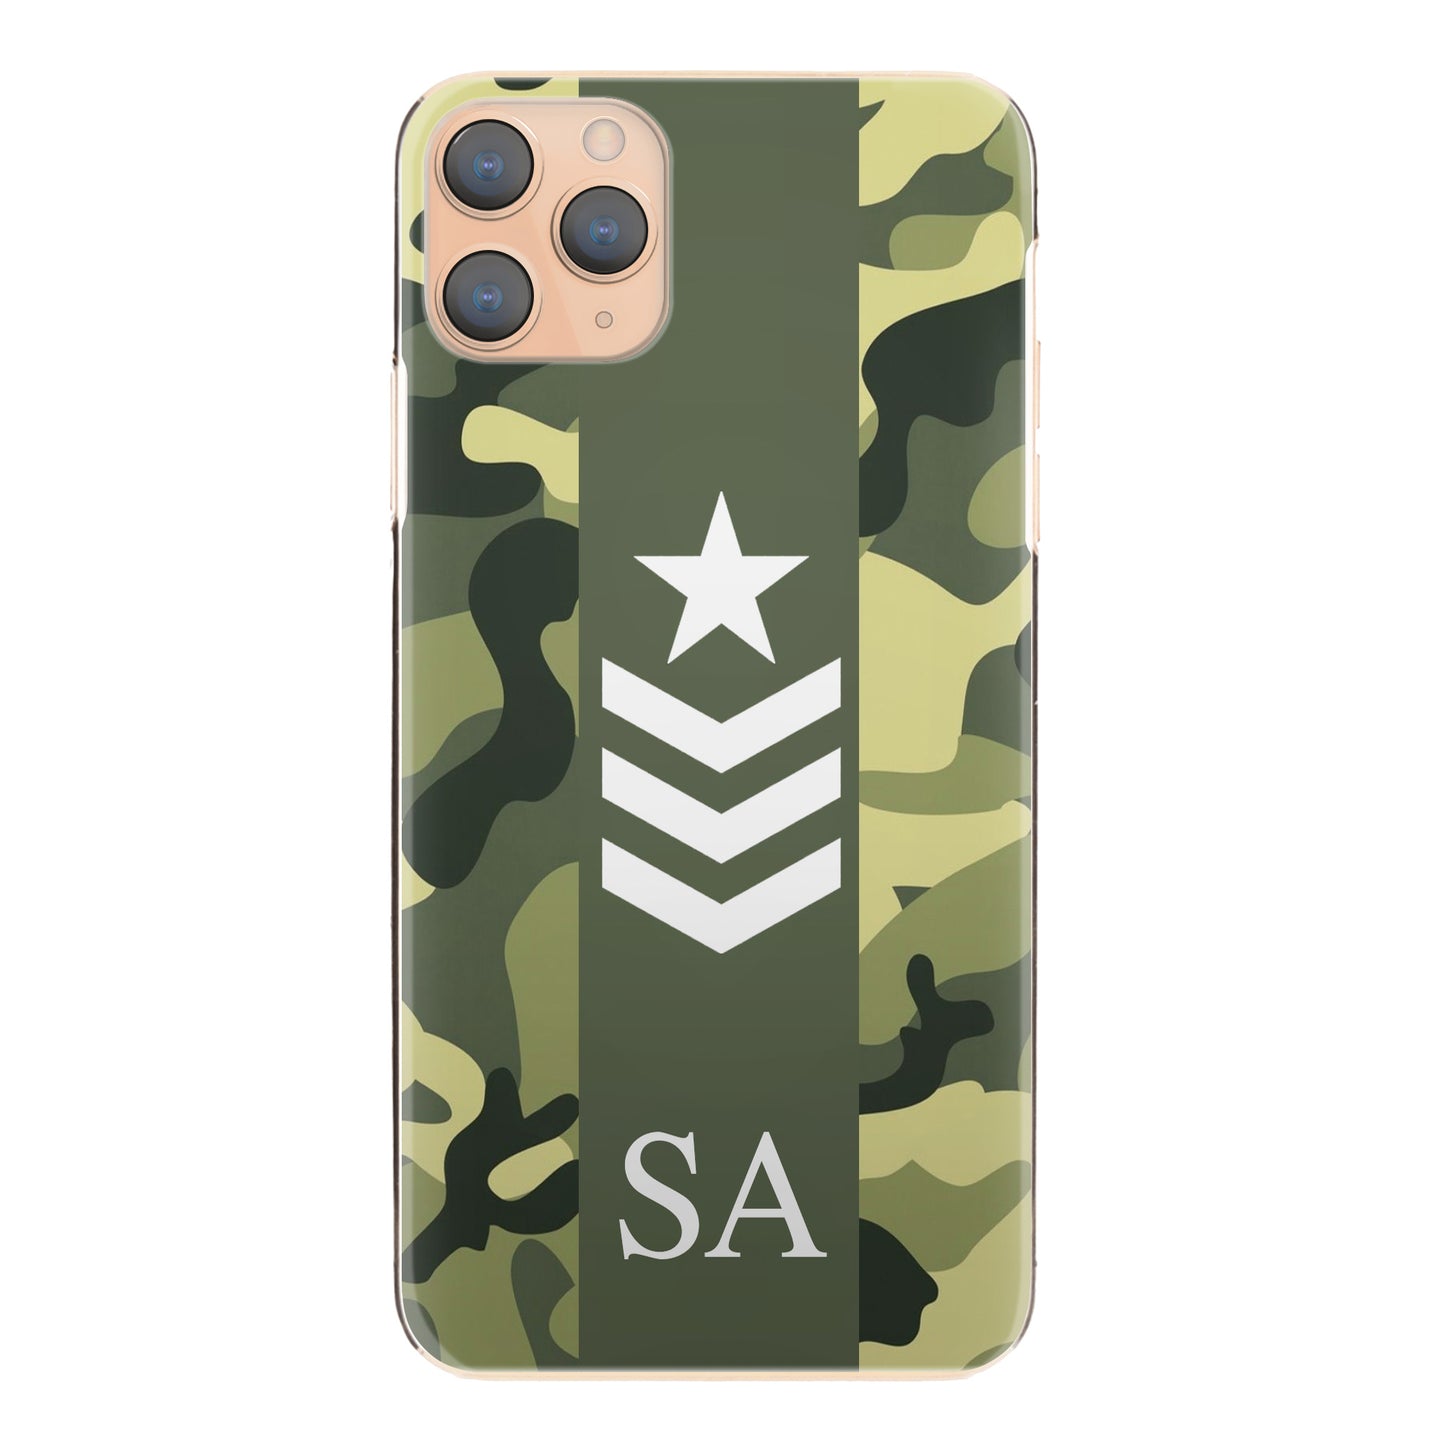 Personalised Xiaomi Phone Hard Case with Initials and Army Rank on Classic Green Camo